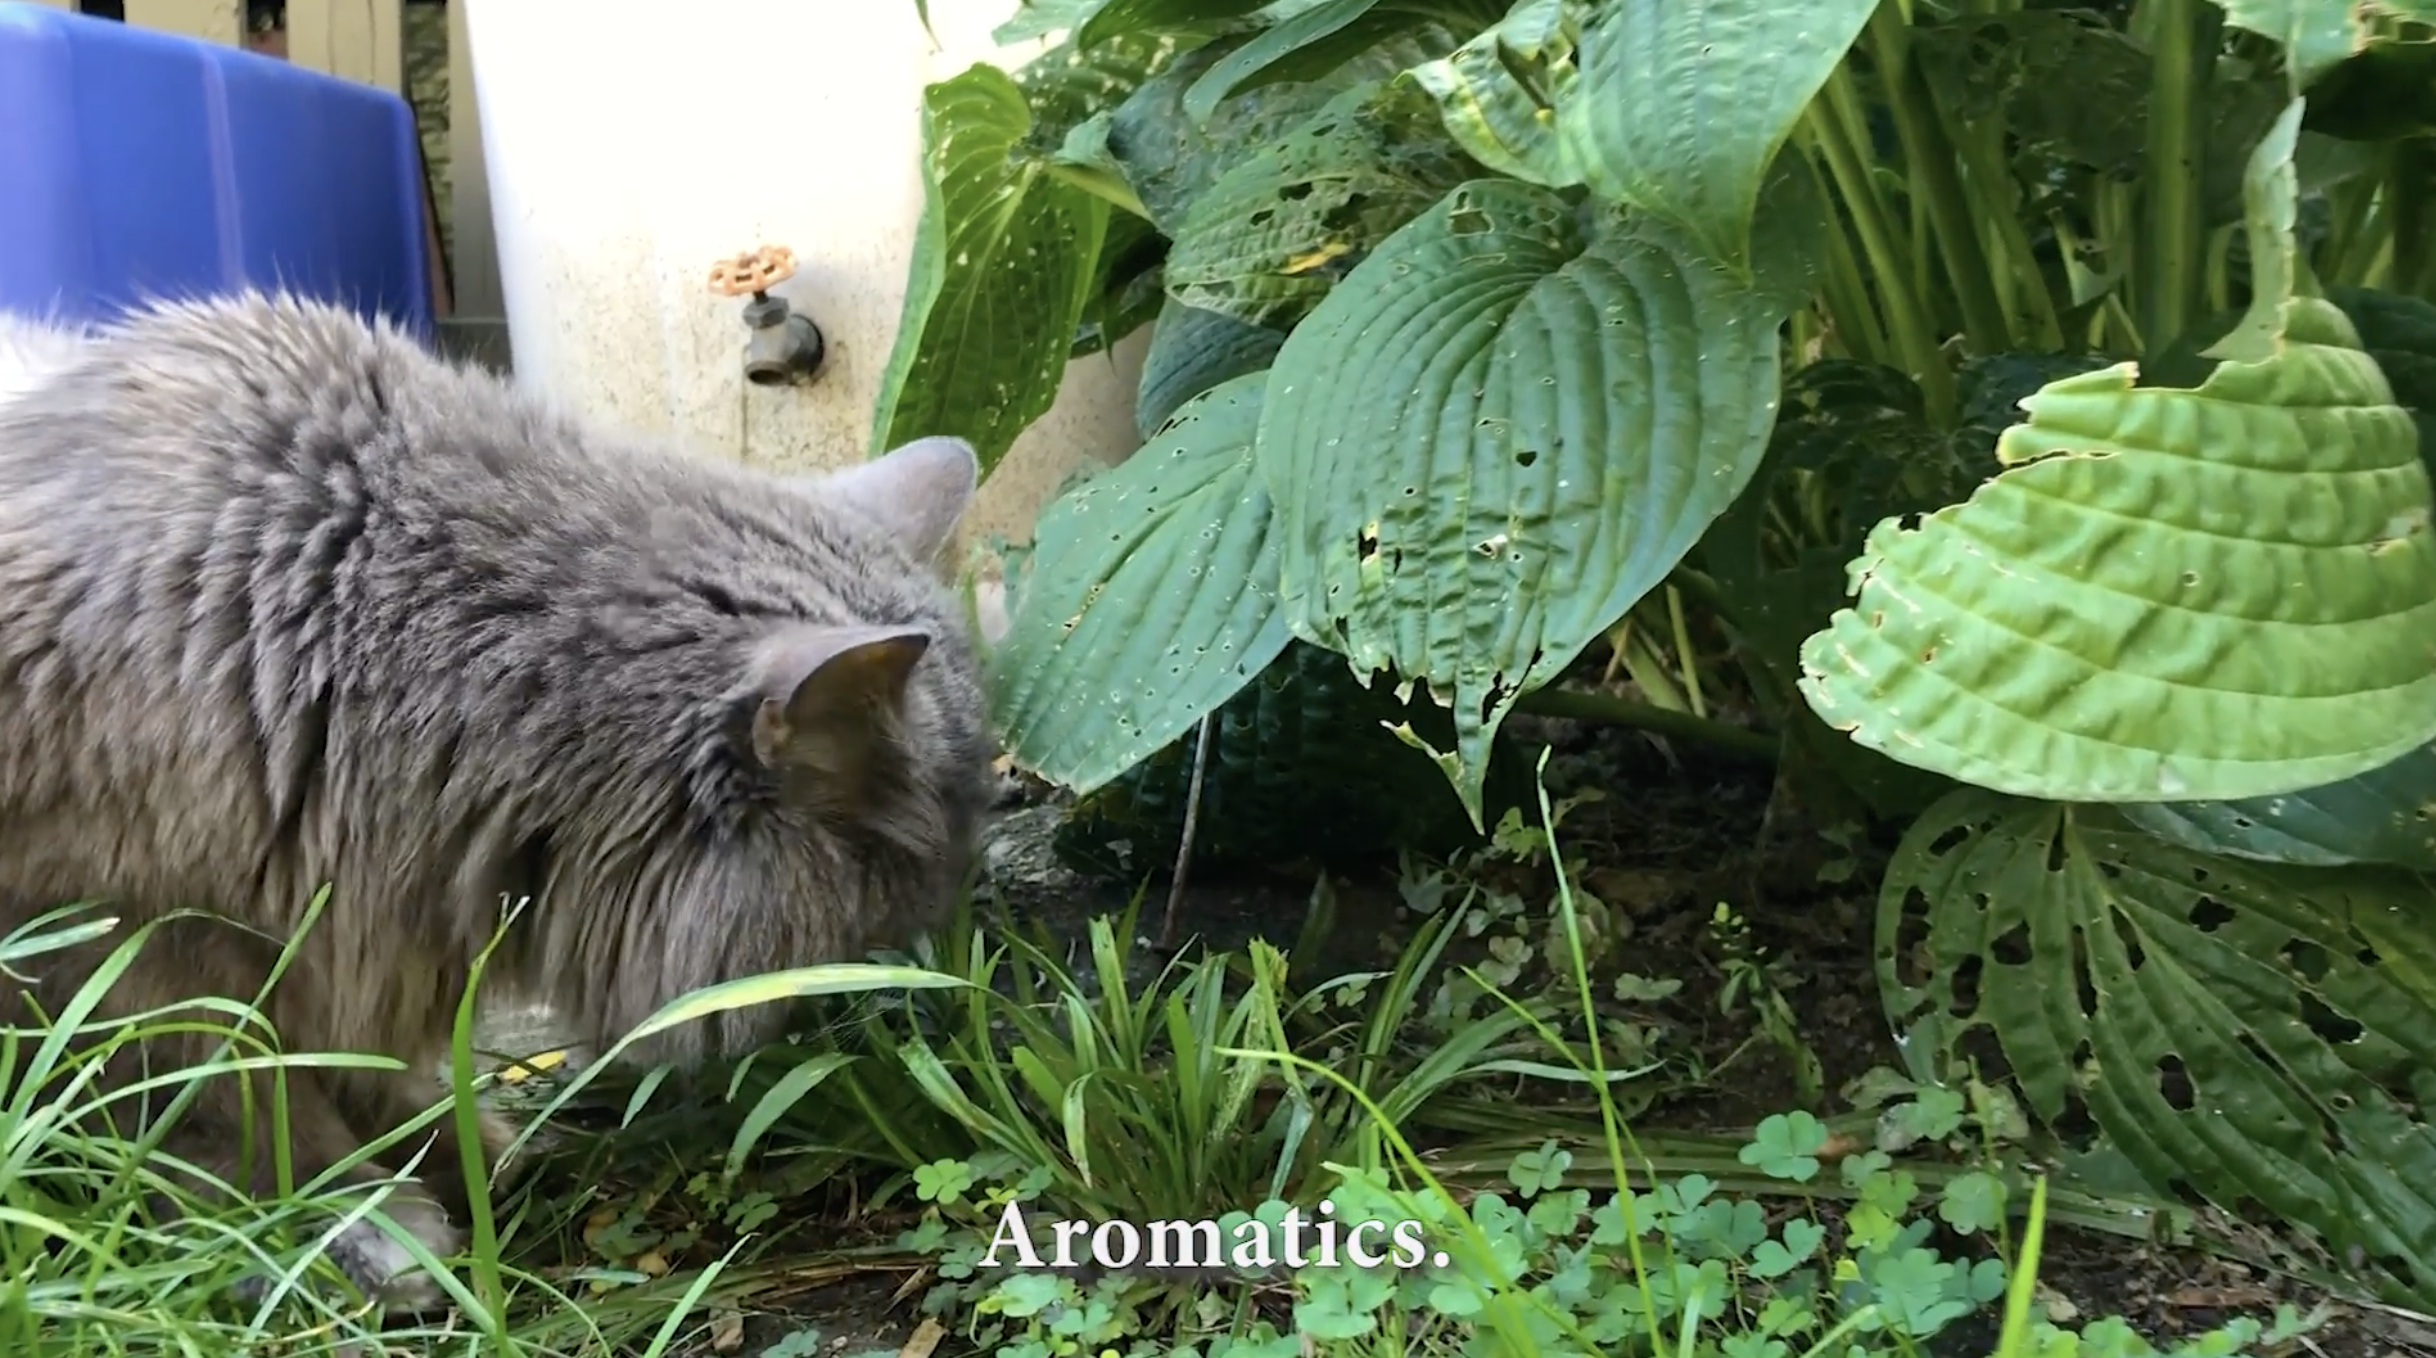 Image of a gray cat at sniffing around in a garden, with a caption reading 